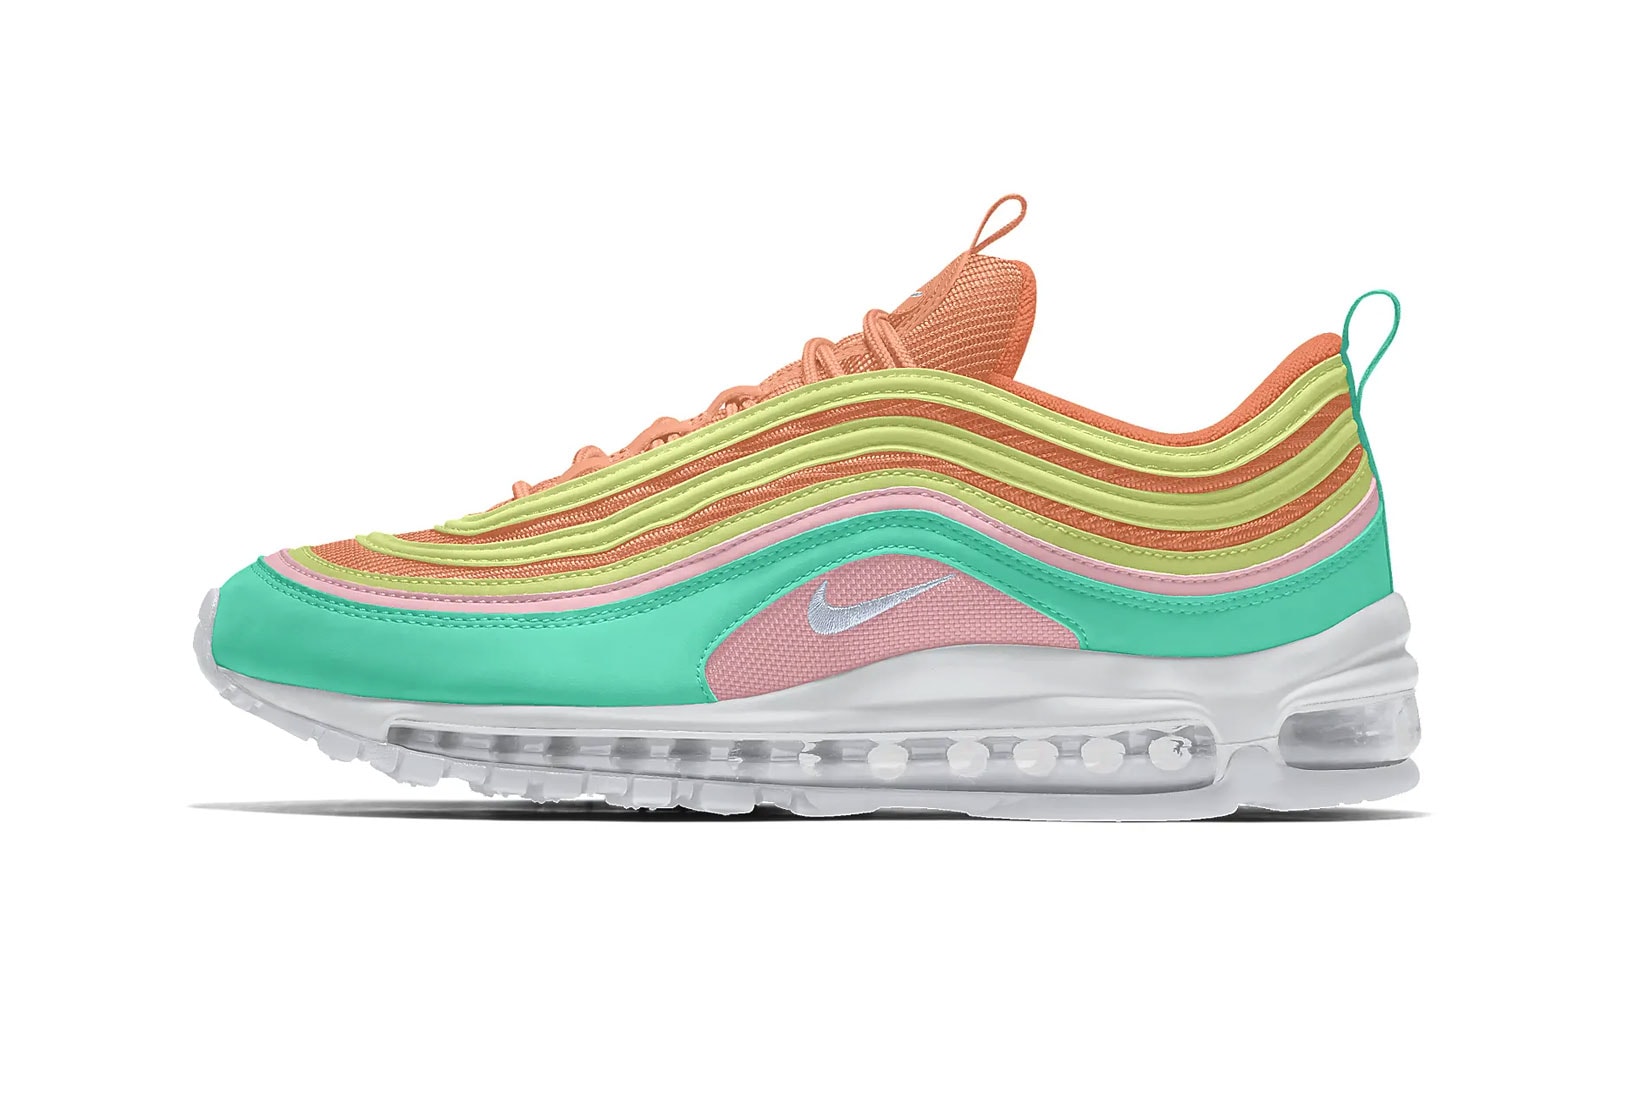 nike by you air max 97 am97 mint green pink orange